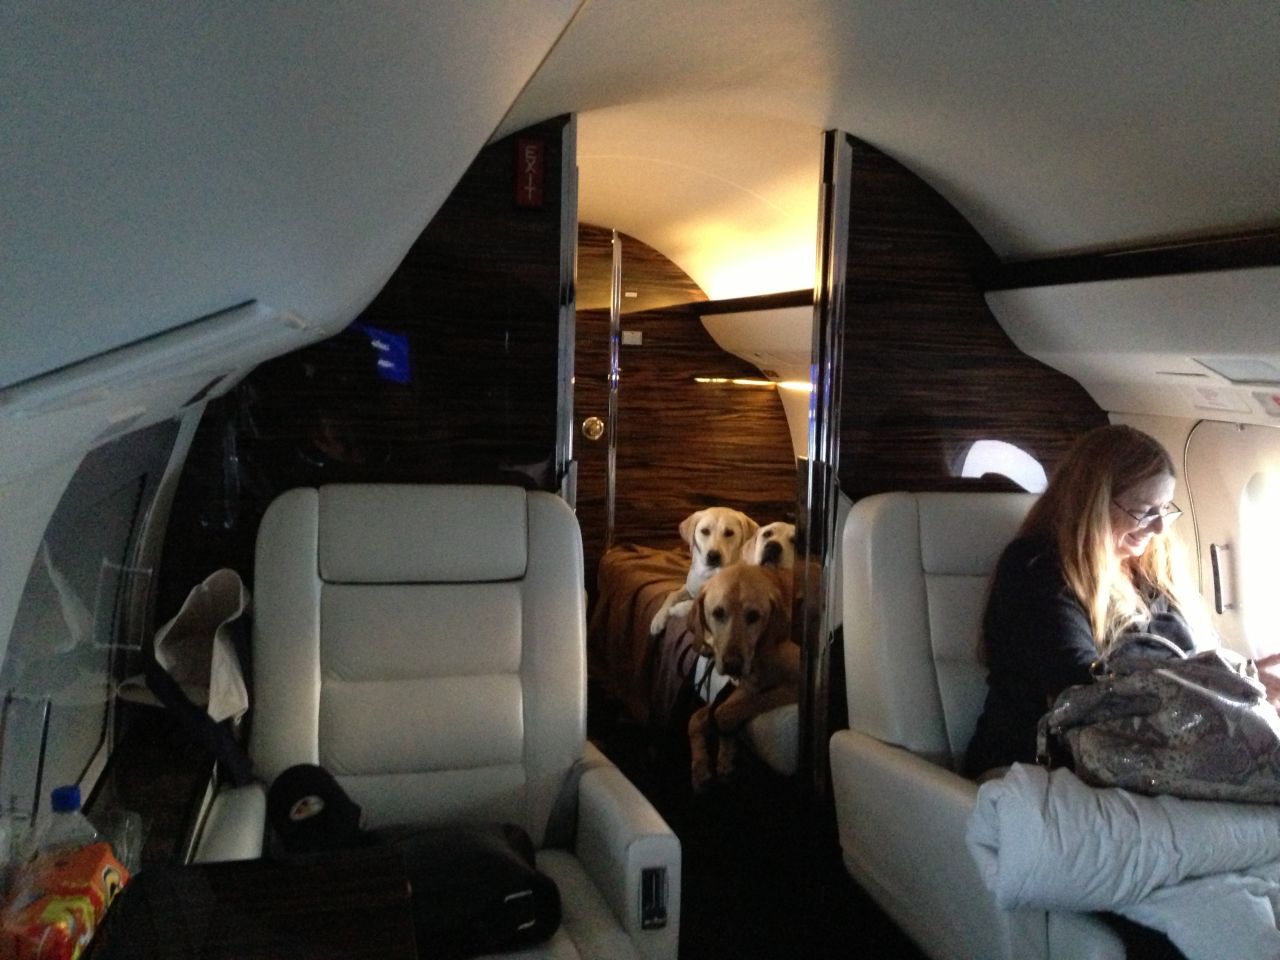 Chaz Dean's Labradors Hunter, Bella Moon and Riley June get comfortable in the back of a Gulfstream jet for their journey from L.A. to Pennsylvania.